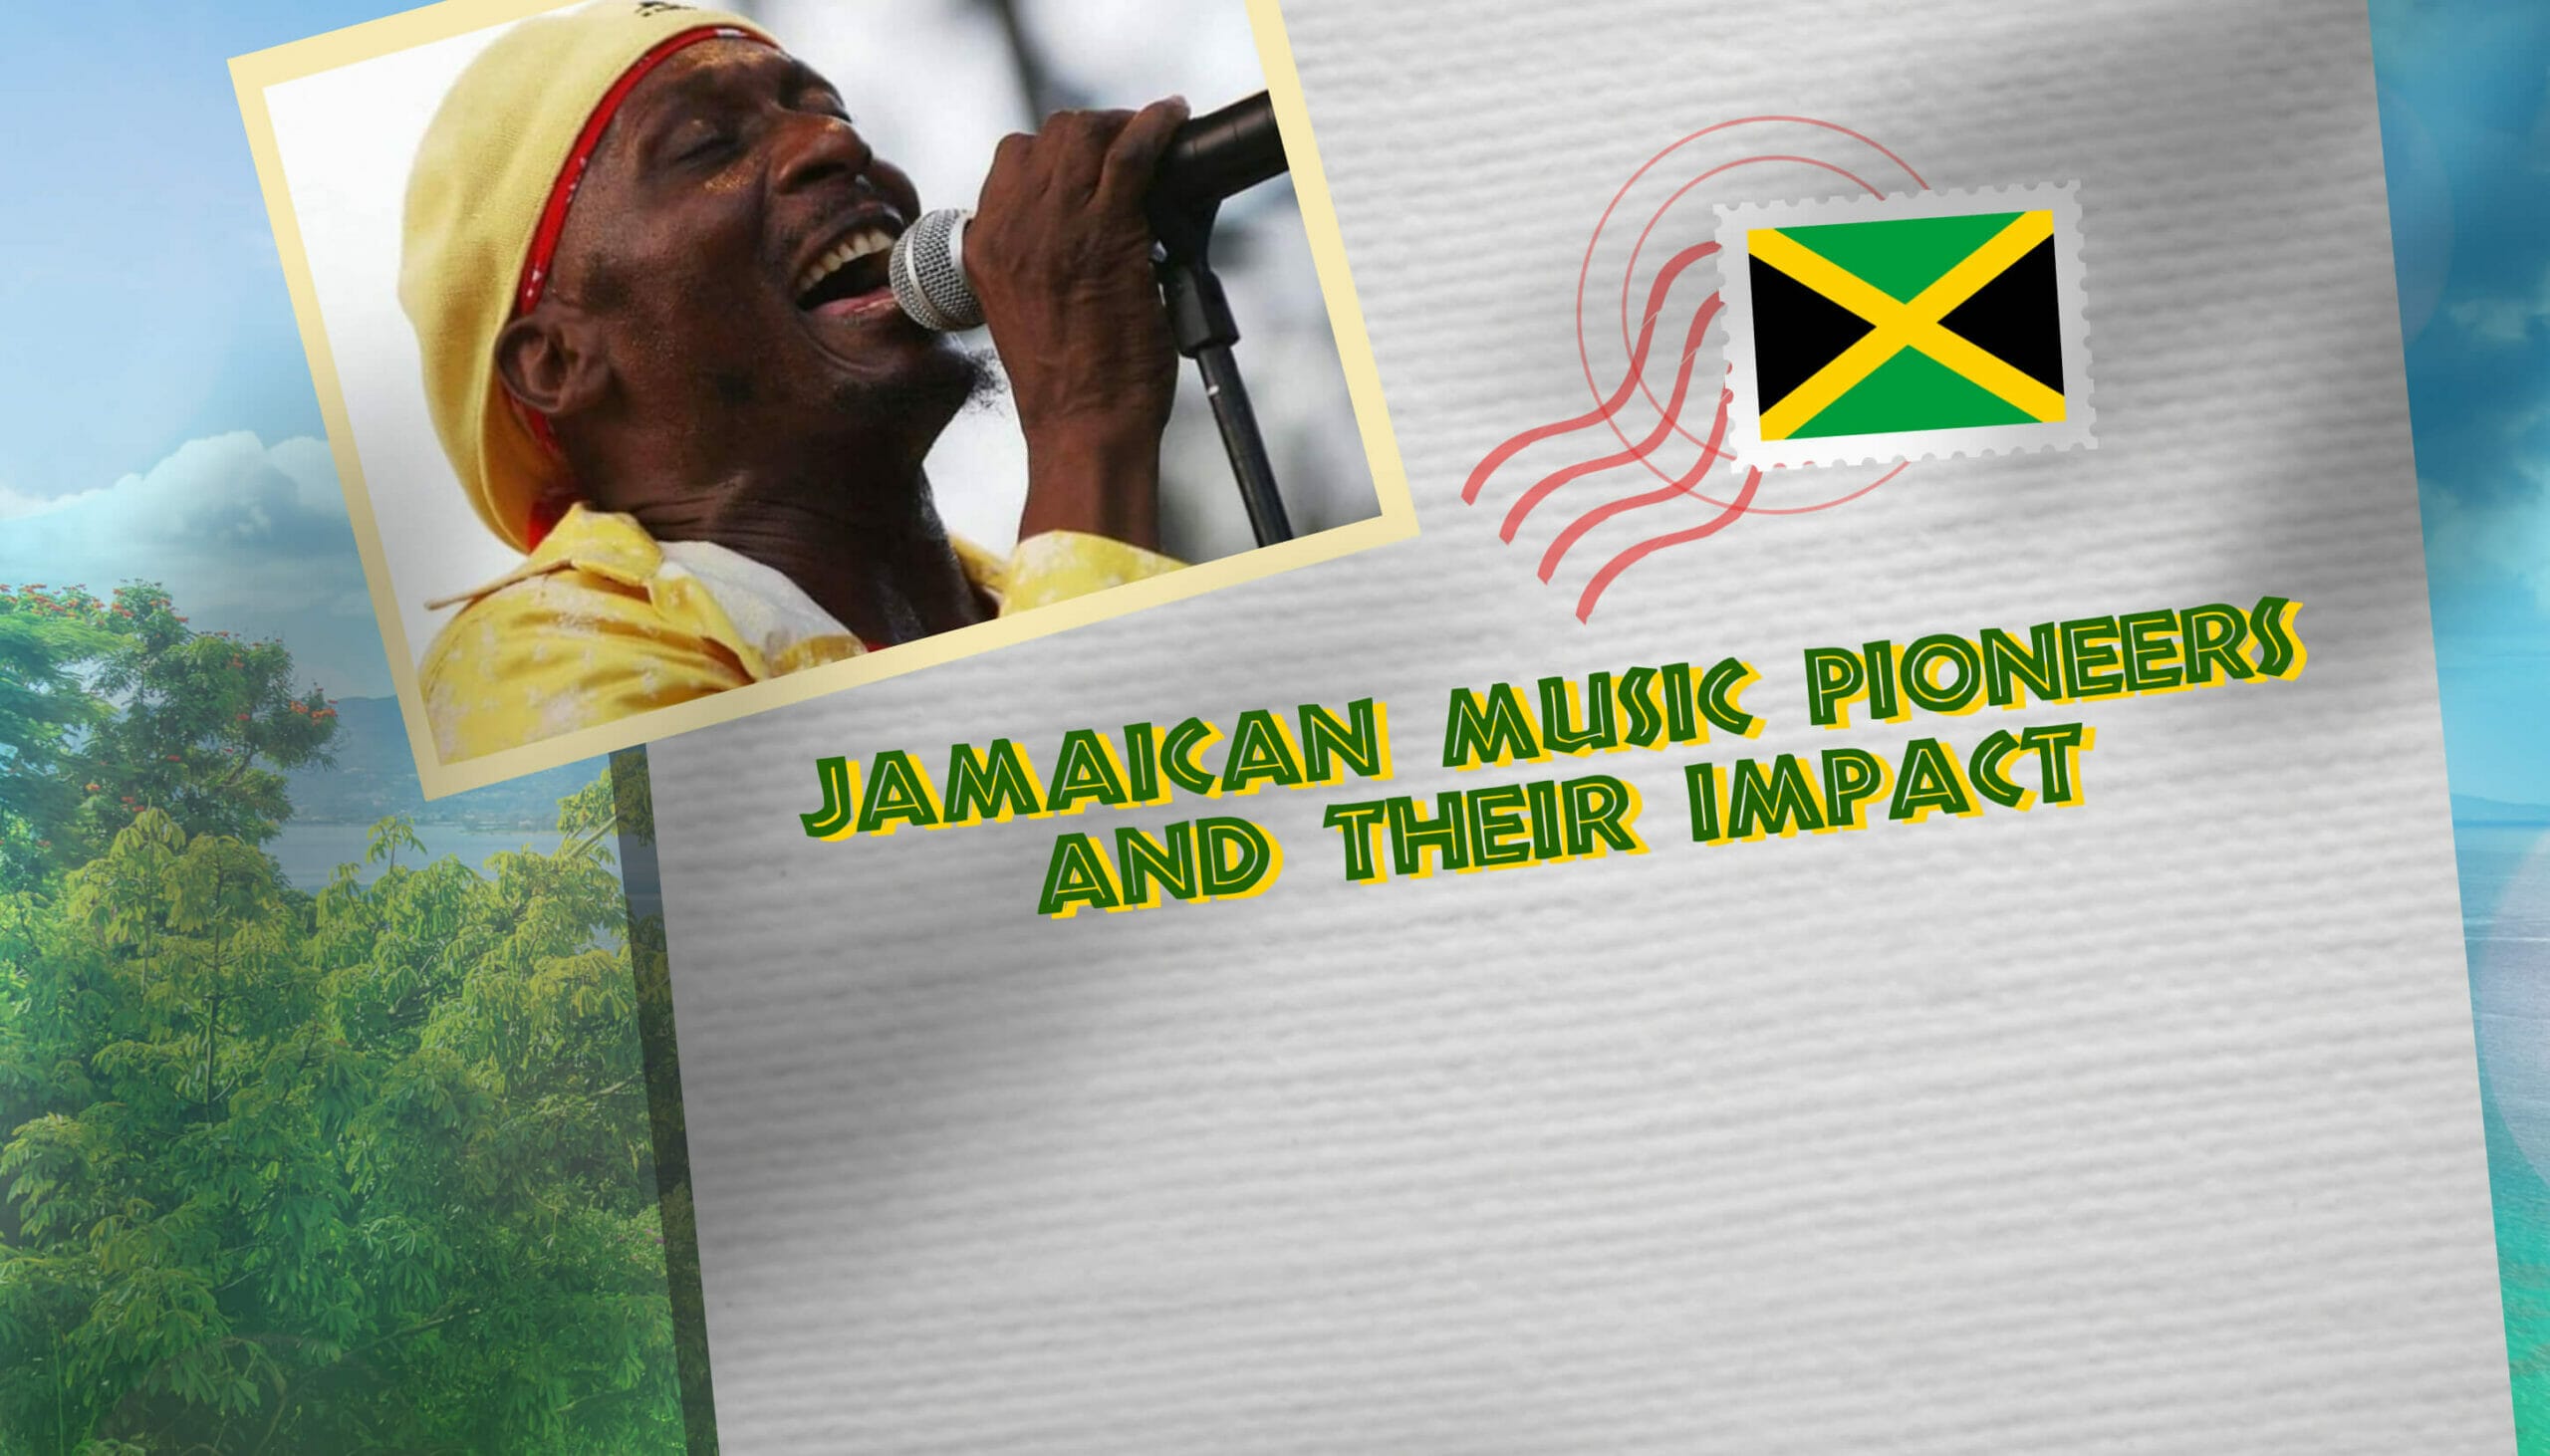 Jamaican music pioneers and their impact